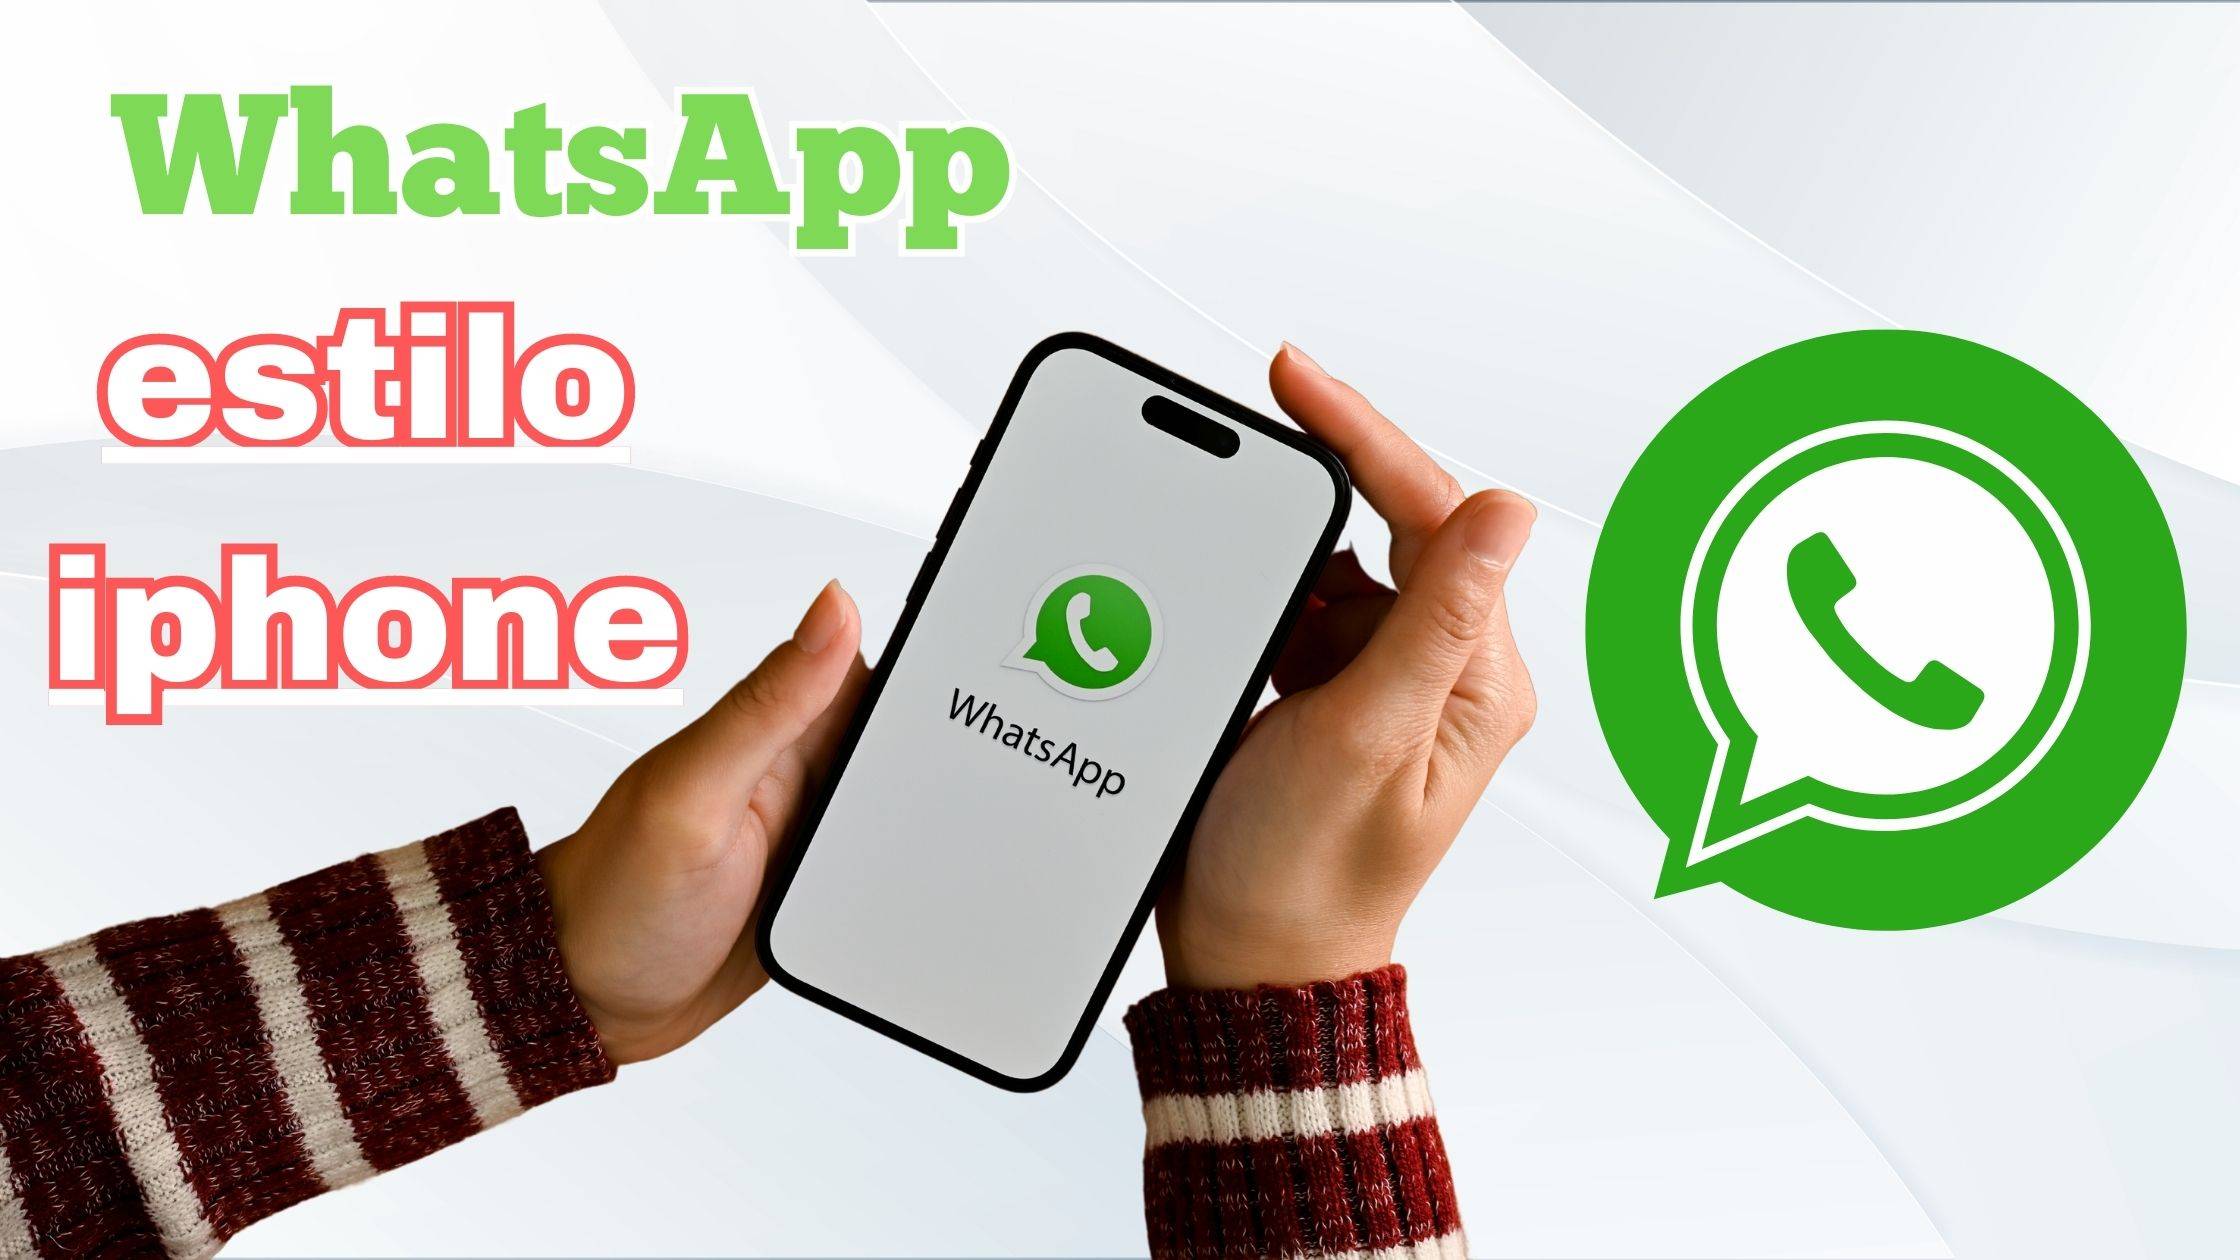 WhatsApp estilo iphone for android is available now and you can change the design of WhatsApp Android to that of WhatsApp estilo iPhone.